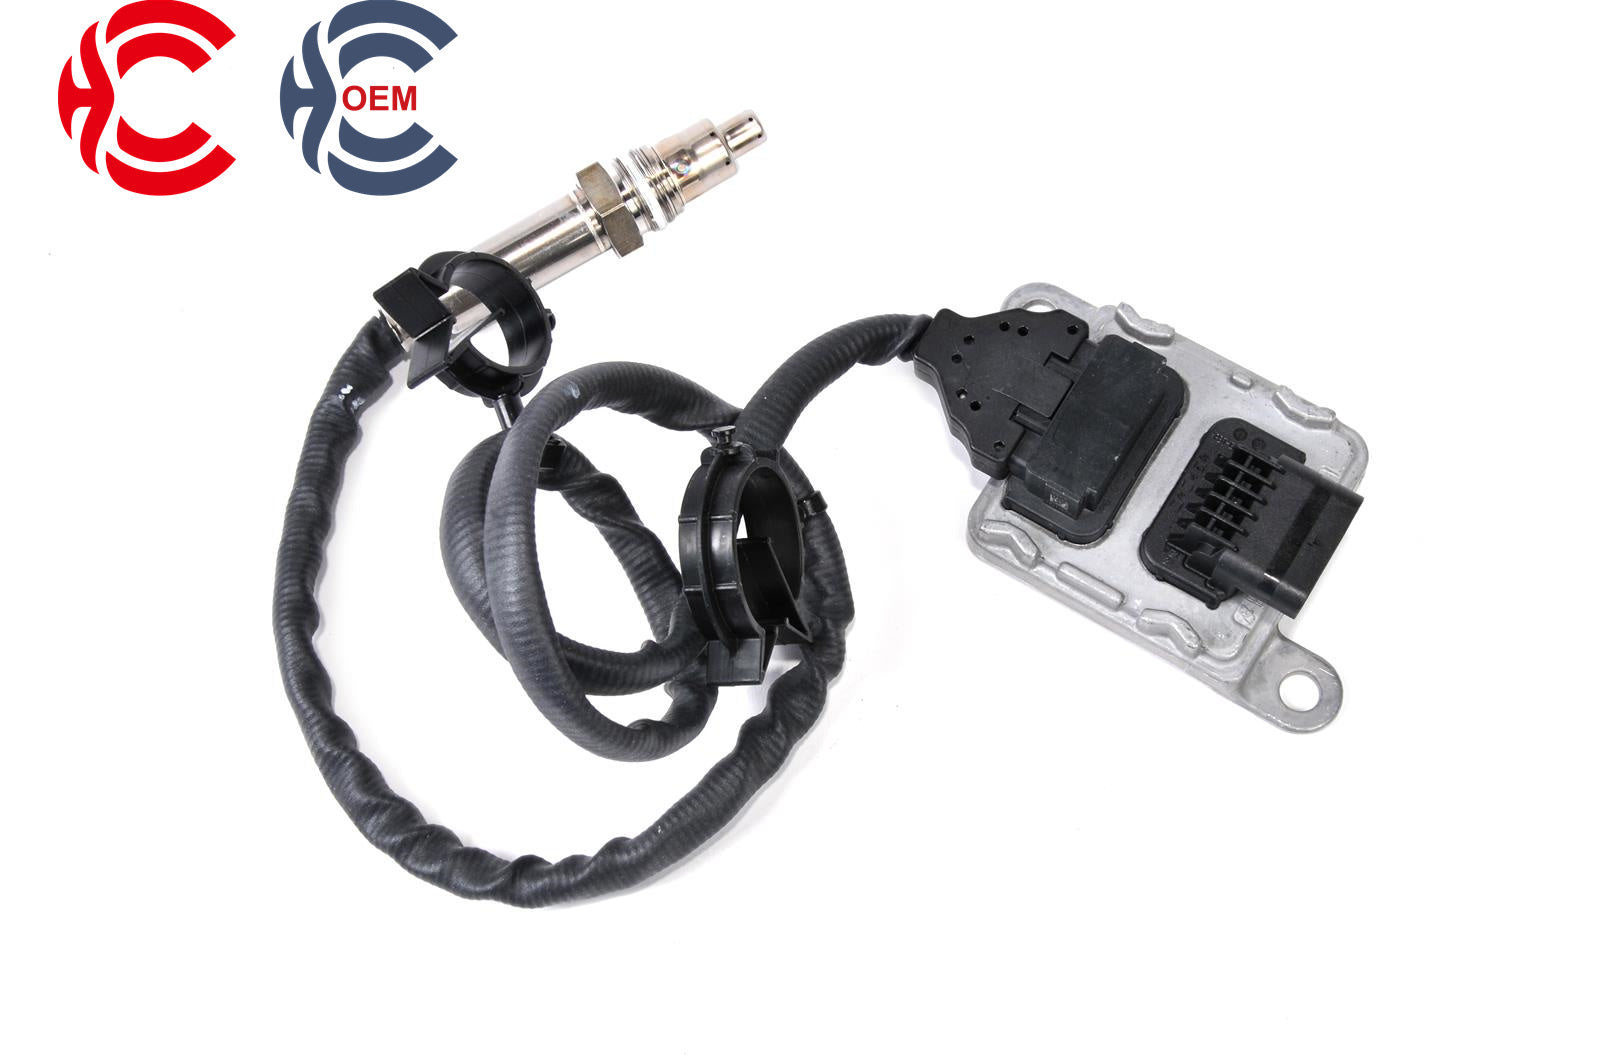 OEM: SNS 430 55495830Material: ABS metalColor: black silverOrigin: Made in ChinaWeight: 400gPacking List: 1* Nitrogen oxide sensor NOx More ServiceWe can provide OEM Manufacturing serviceWe can Be your one-step solution for Auto PartsWe can provide technical scheme for you Feel Free to Contact Us, We will get back to you as soon as possible.